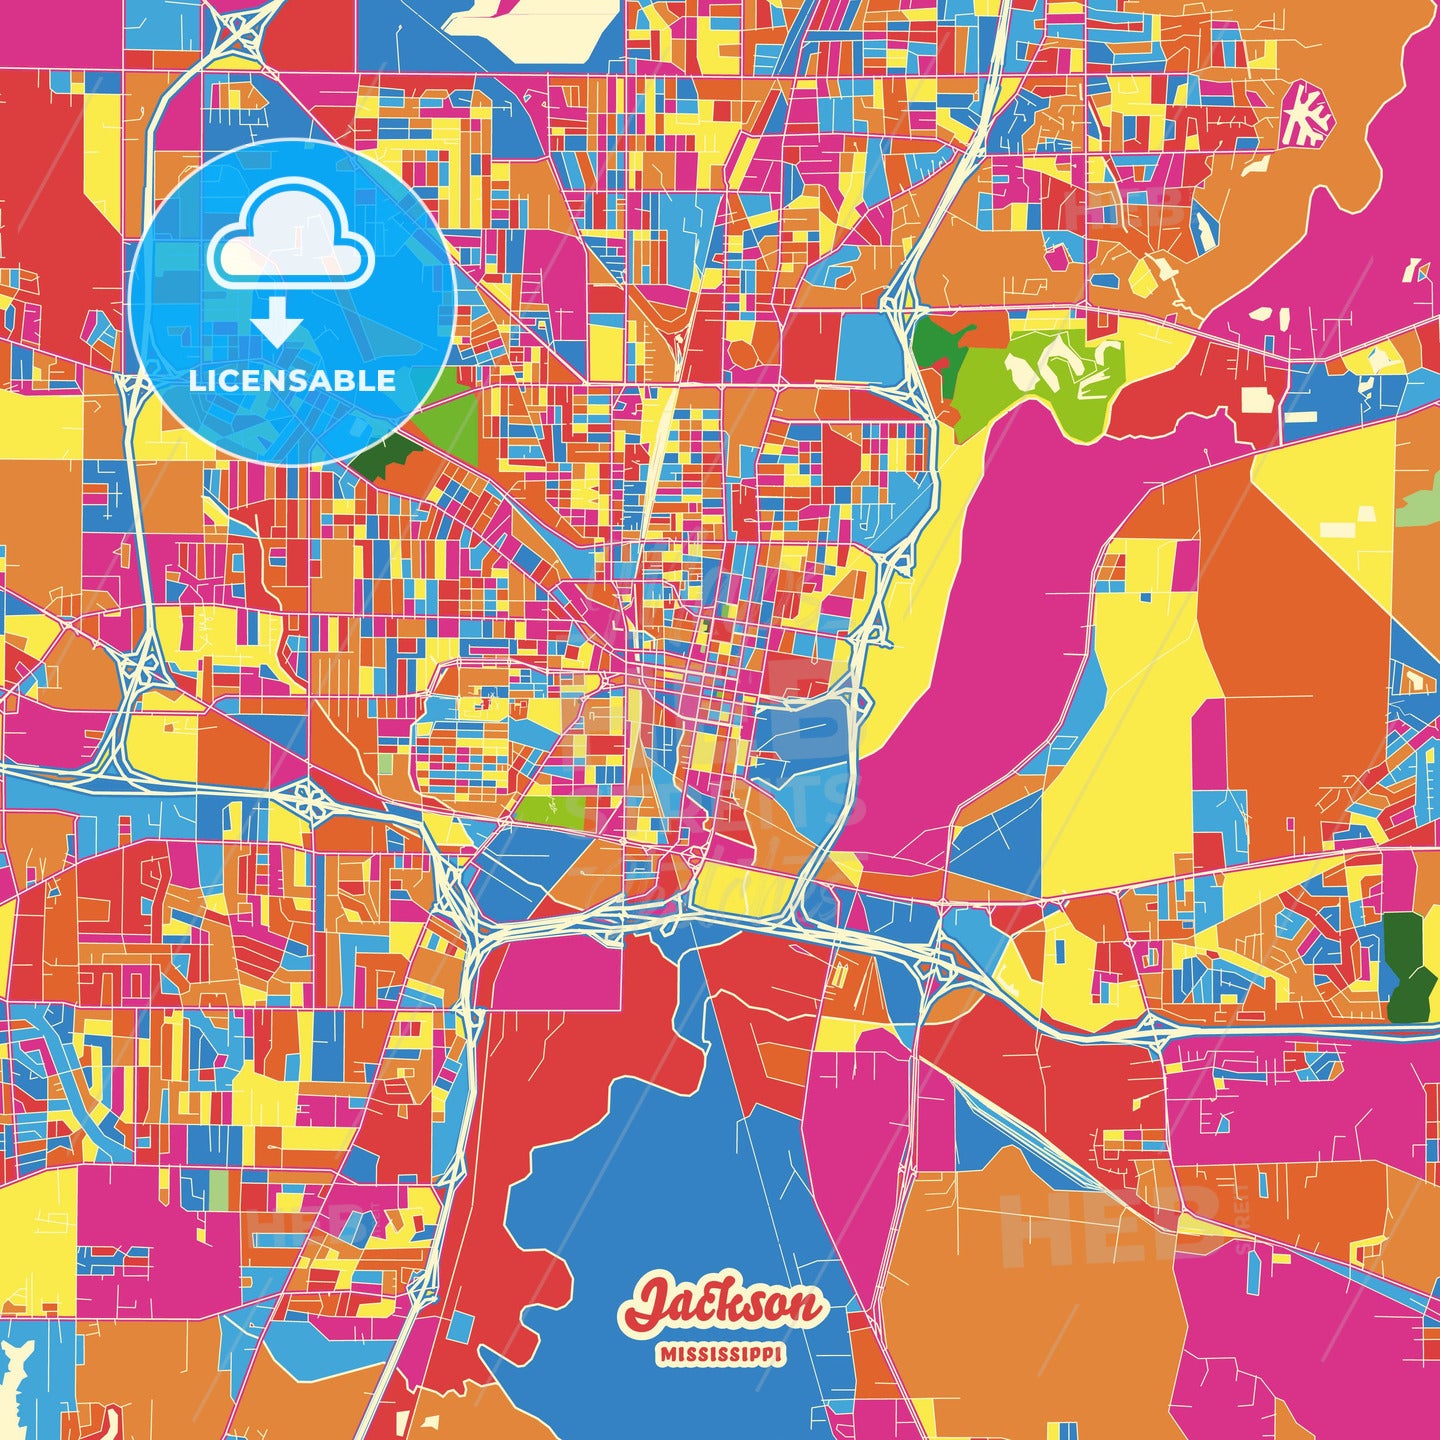 Jackson, United States Crazy Colorful Street Map Poster Template - HEBSTREITS Sketches